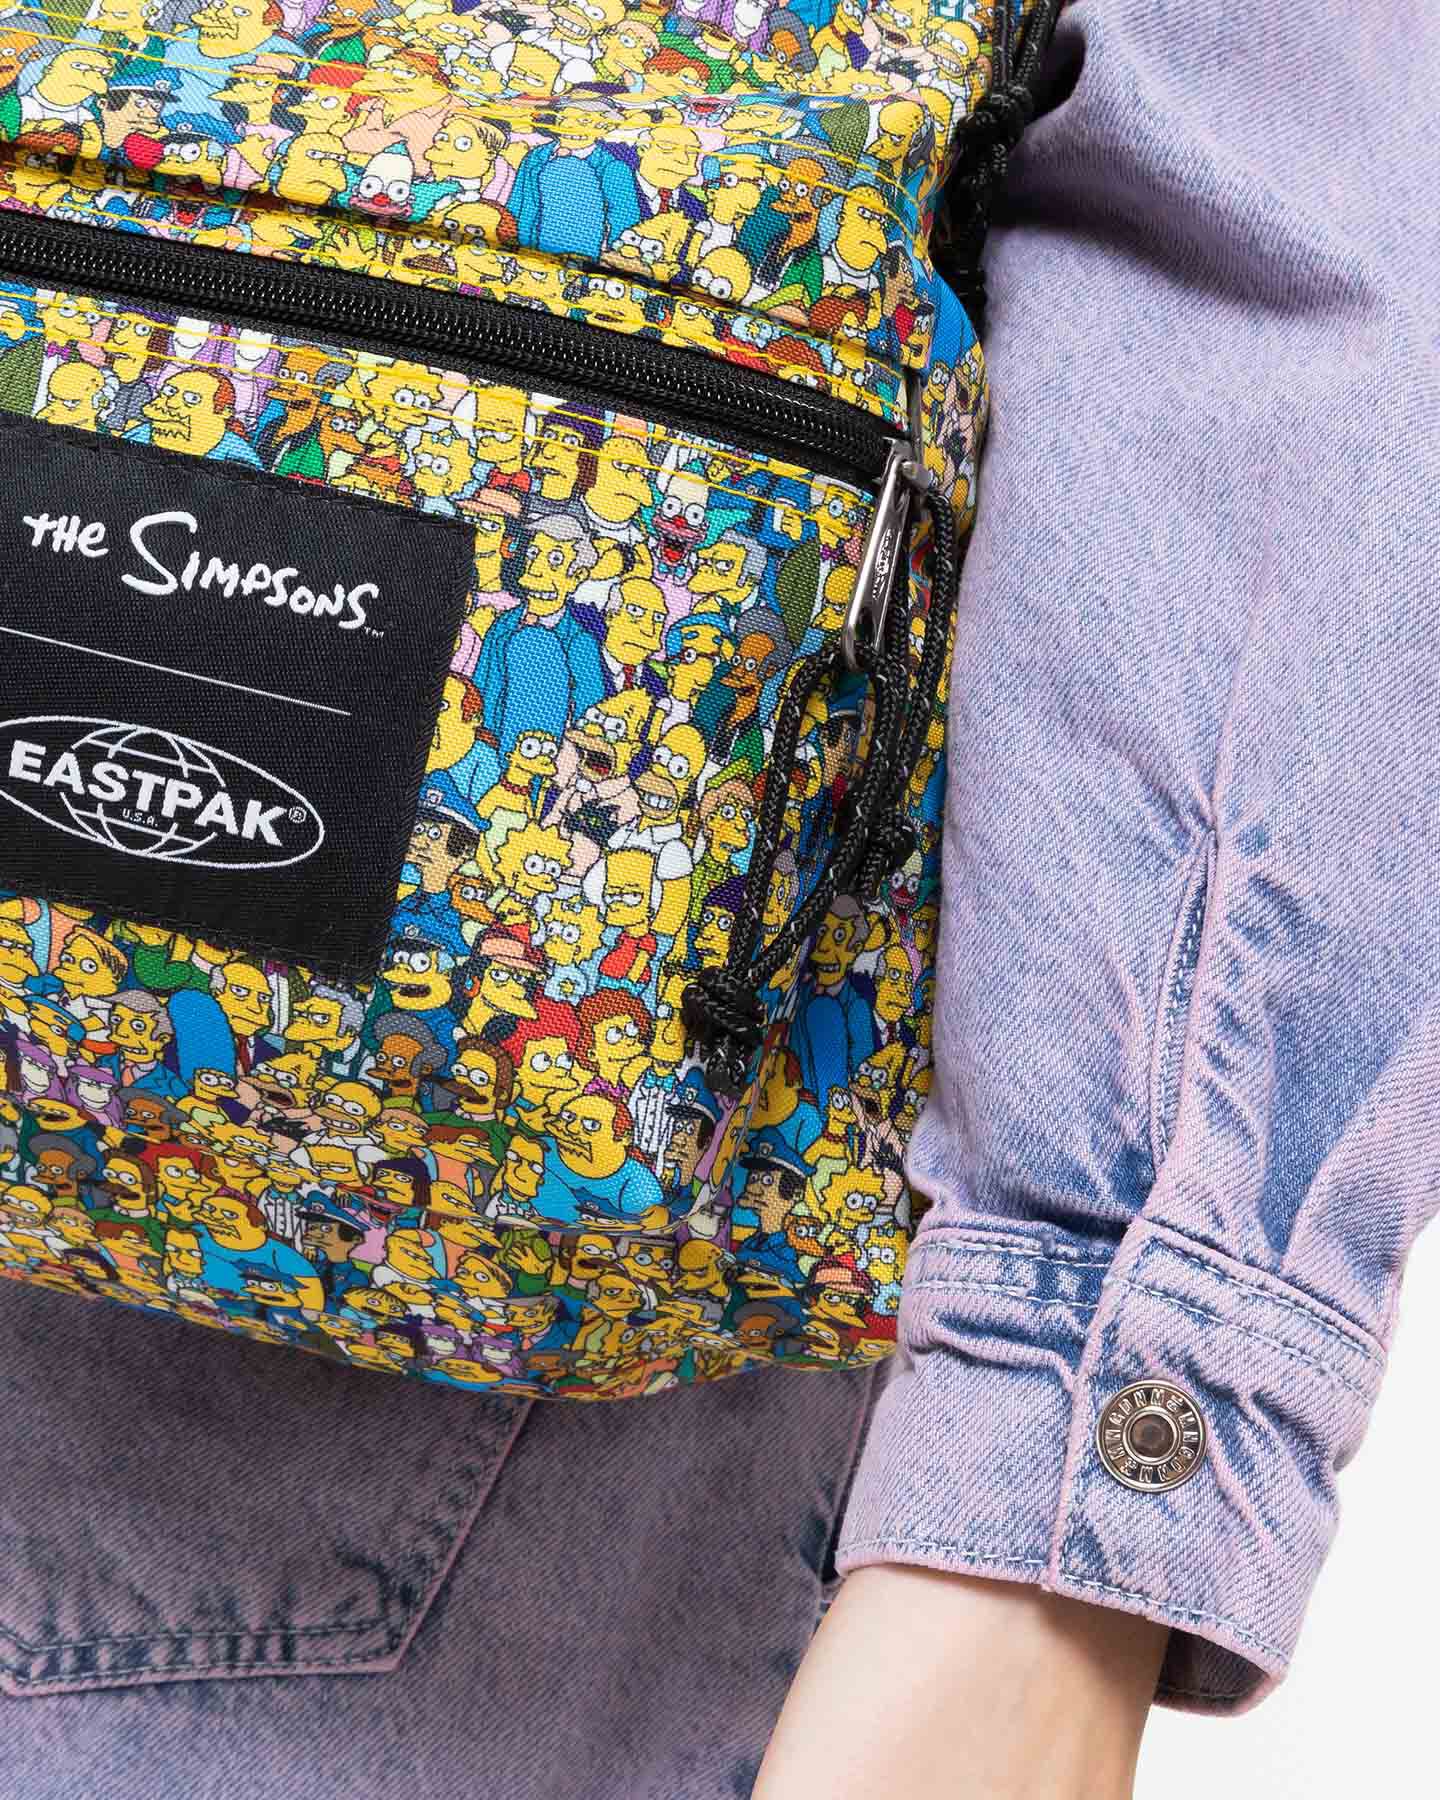  Zaino EASTPAK PADDED ZIPPL'R+ THE SIMPSONS  S5550656|7A2|OS scatto 3